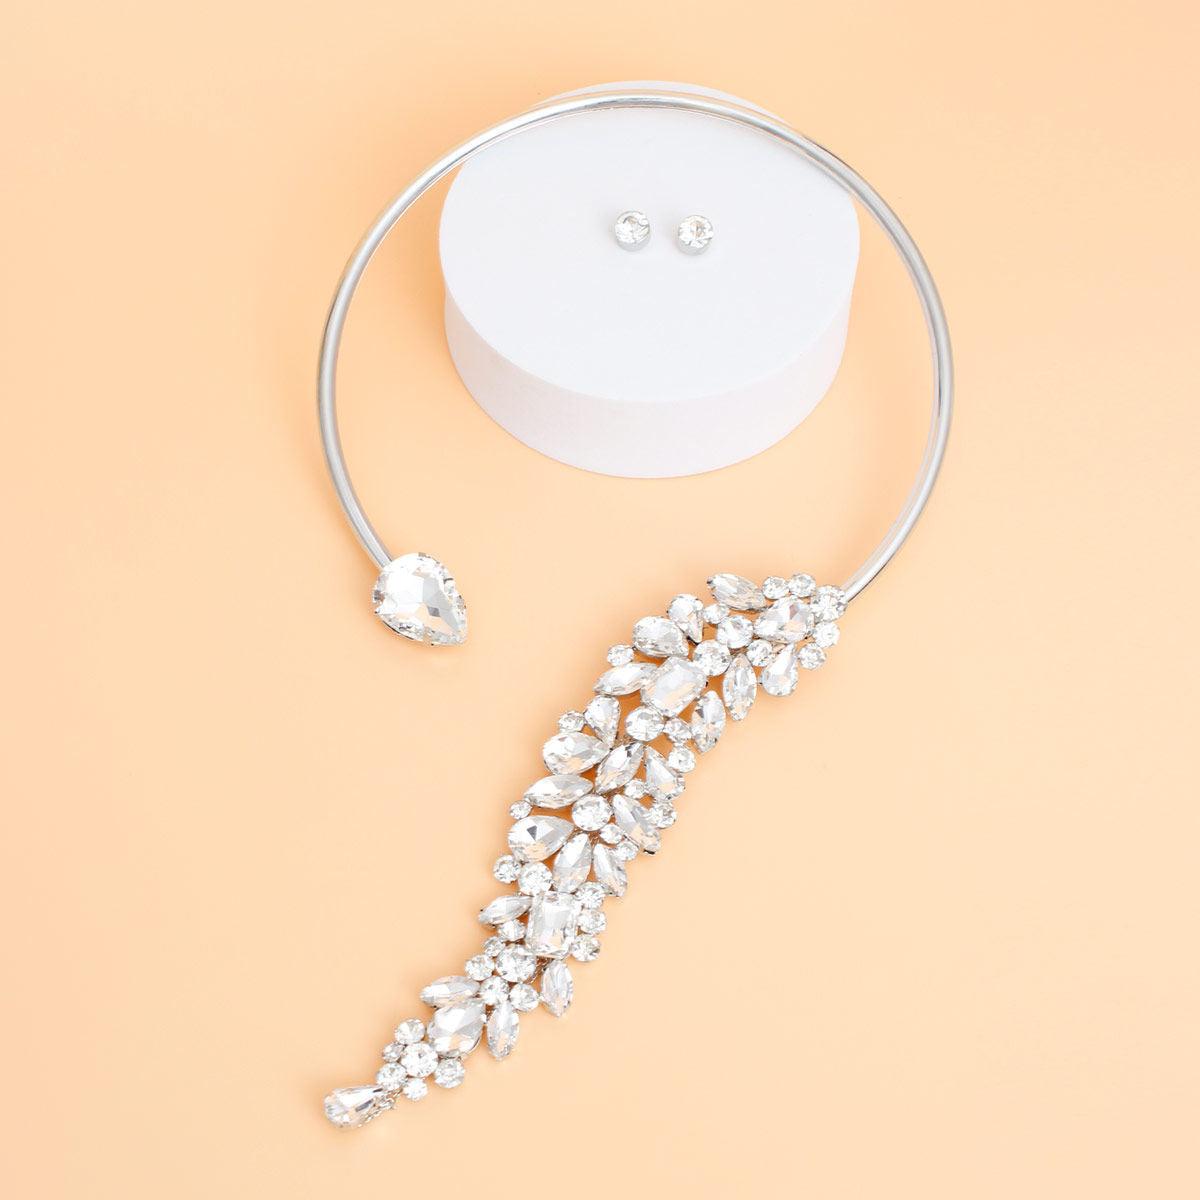 Shine Bright: Silver Clear Rhinestone Leaf Choker Necklace Set - Must-Have Accessory!